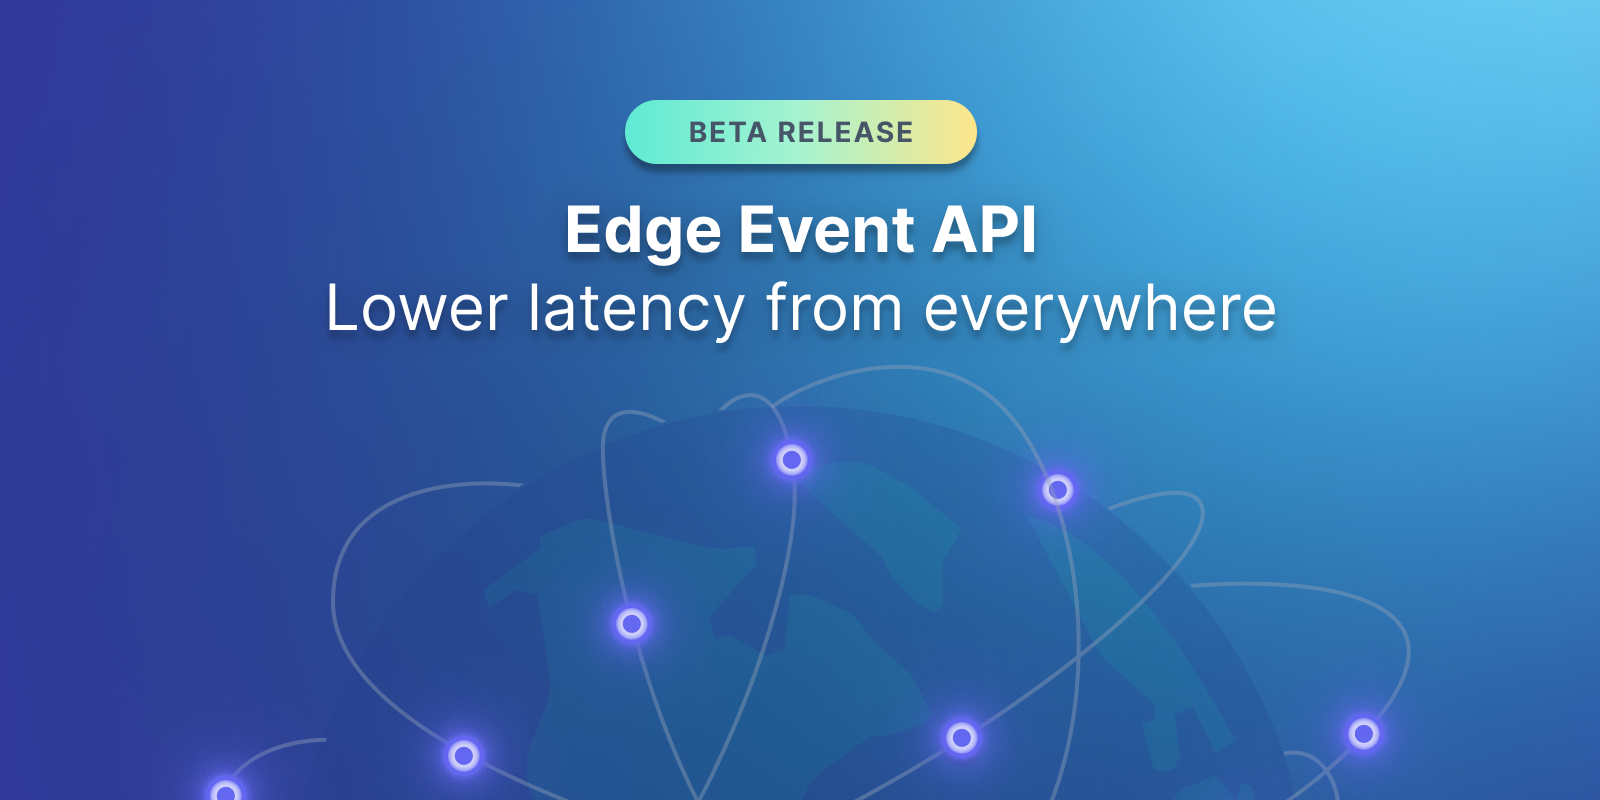 Featured image for Edge Event API Beta: Lower latency from everywhere blog post